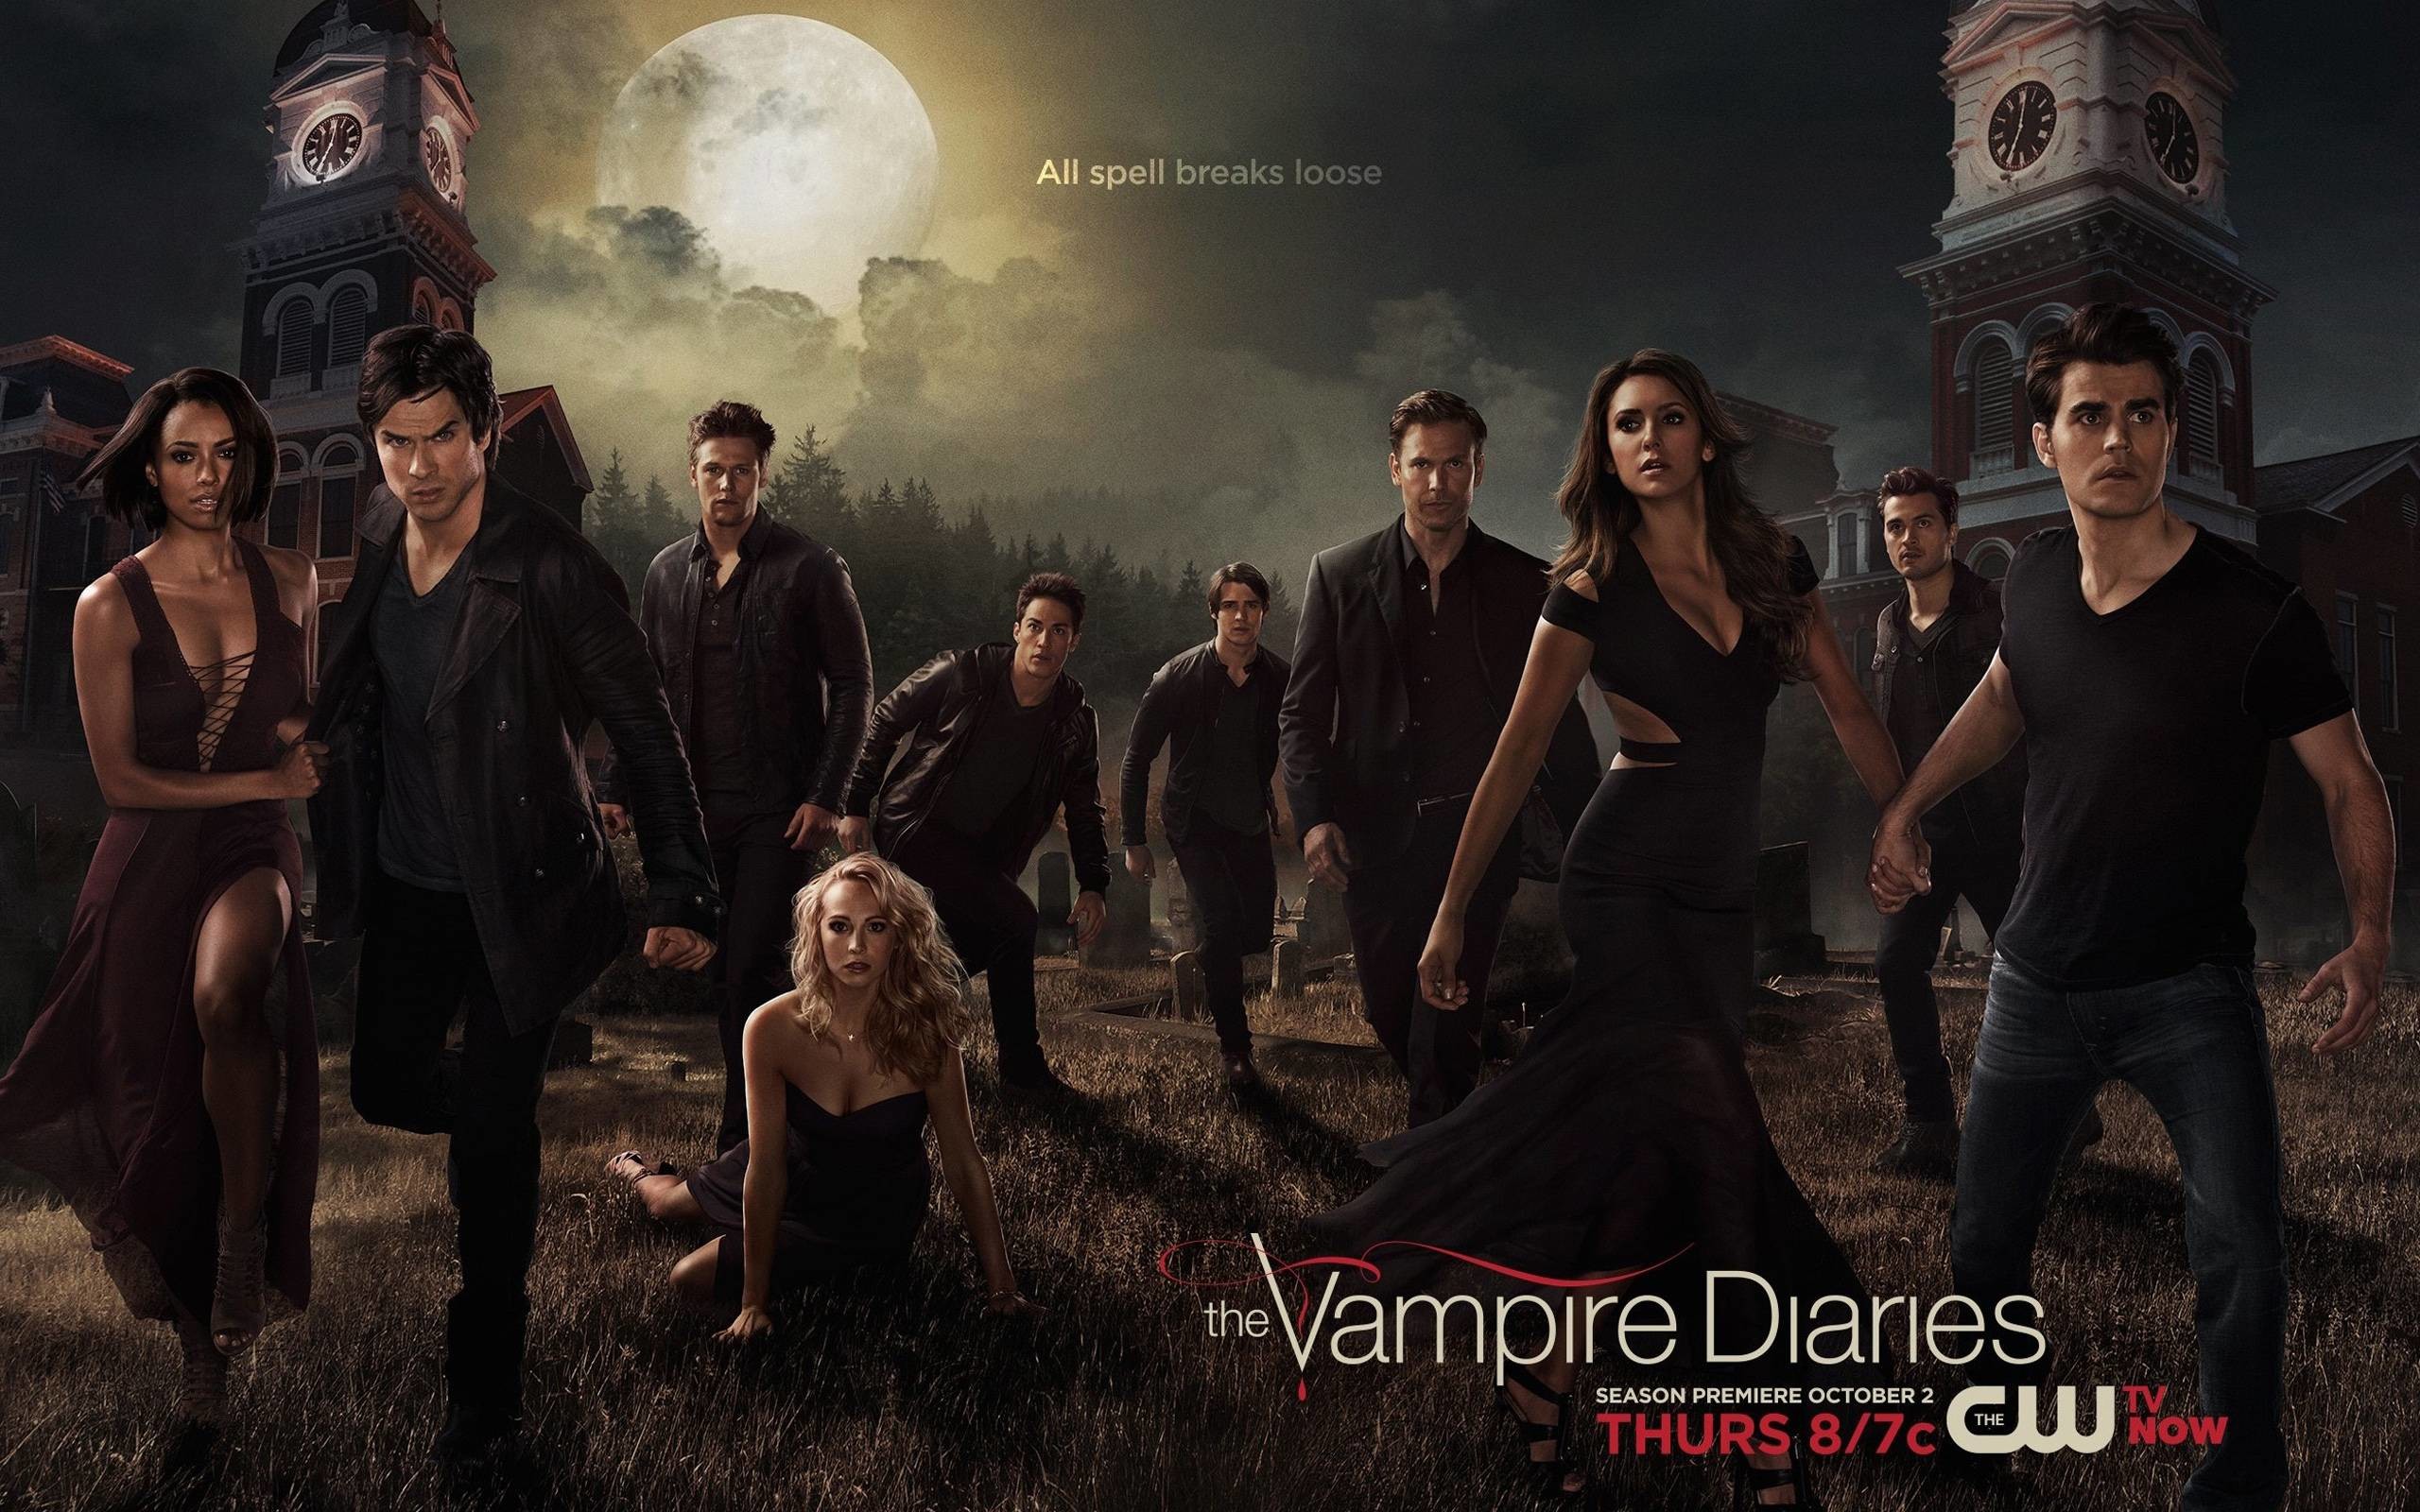 The Vampire Diaries (TV Series) Wallpapers (59+ images inside)